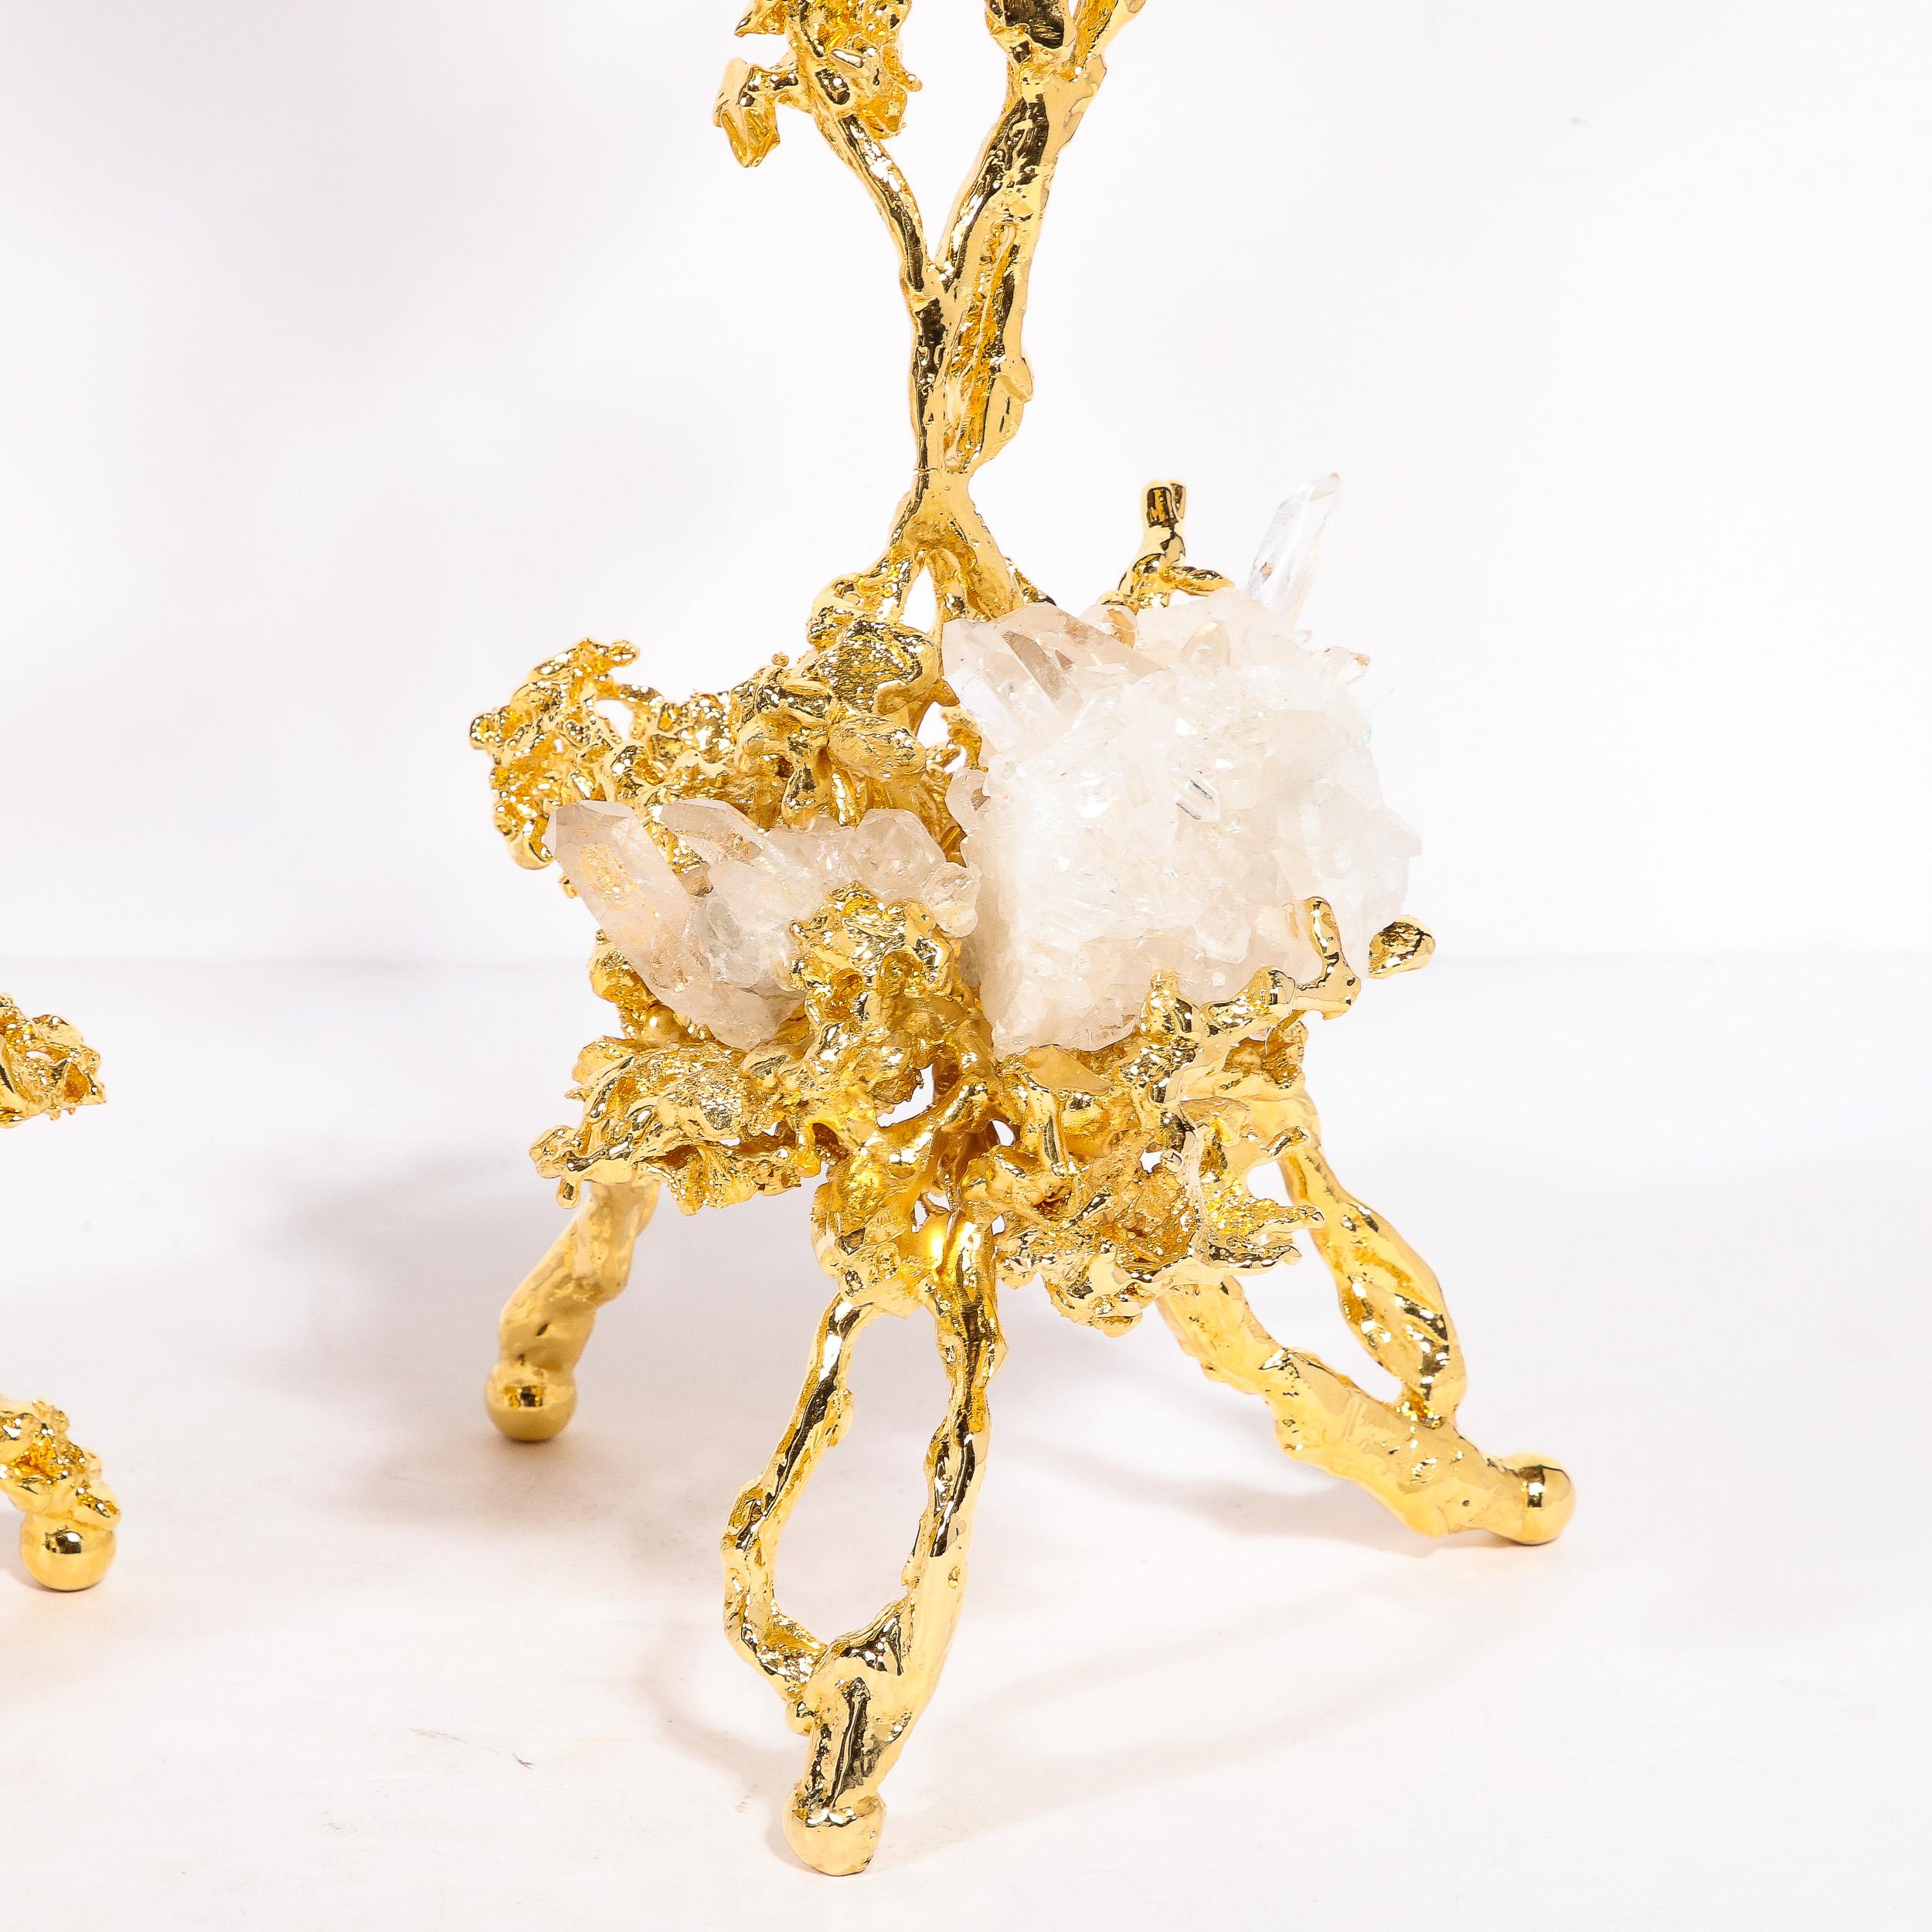 French Pair of 24K Gold Single Branch Candleholders w/ Rock Crystals by Claude Boeltz For Sale